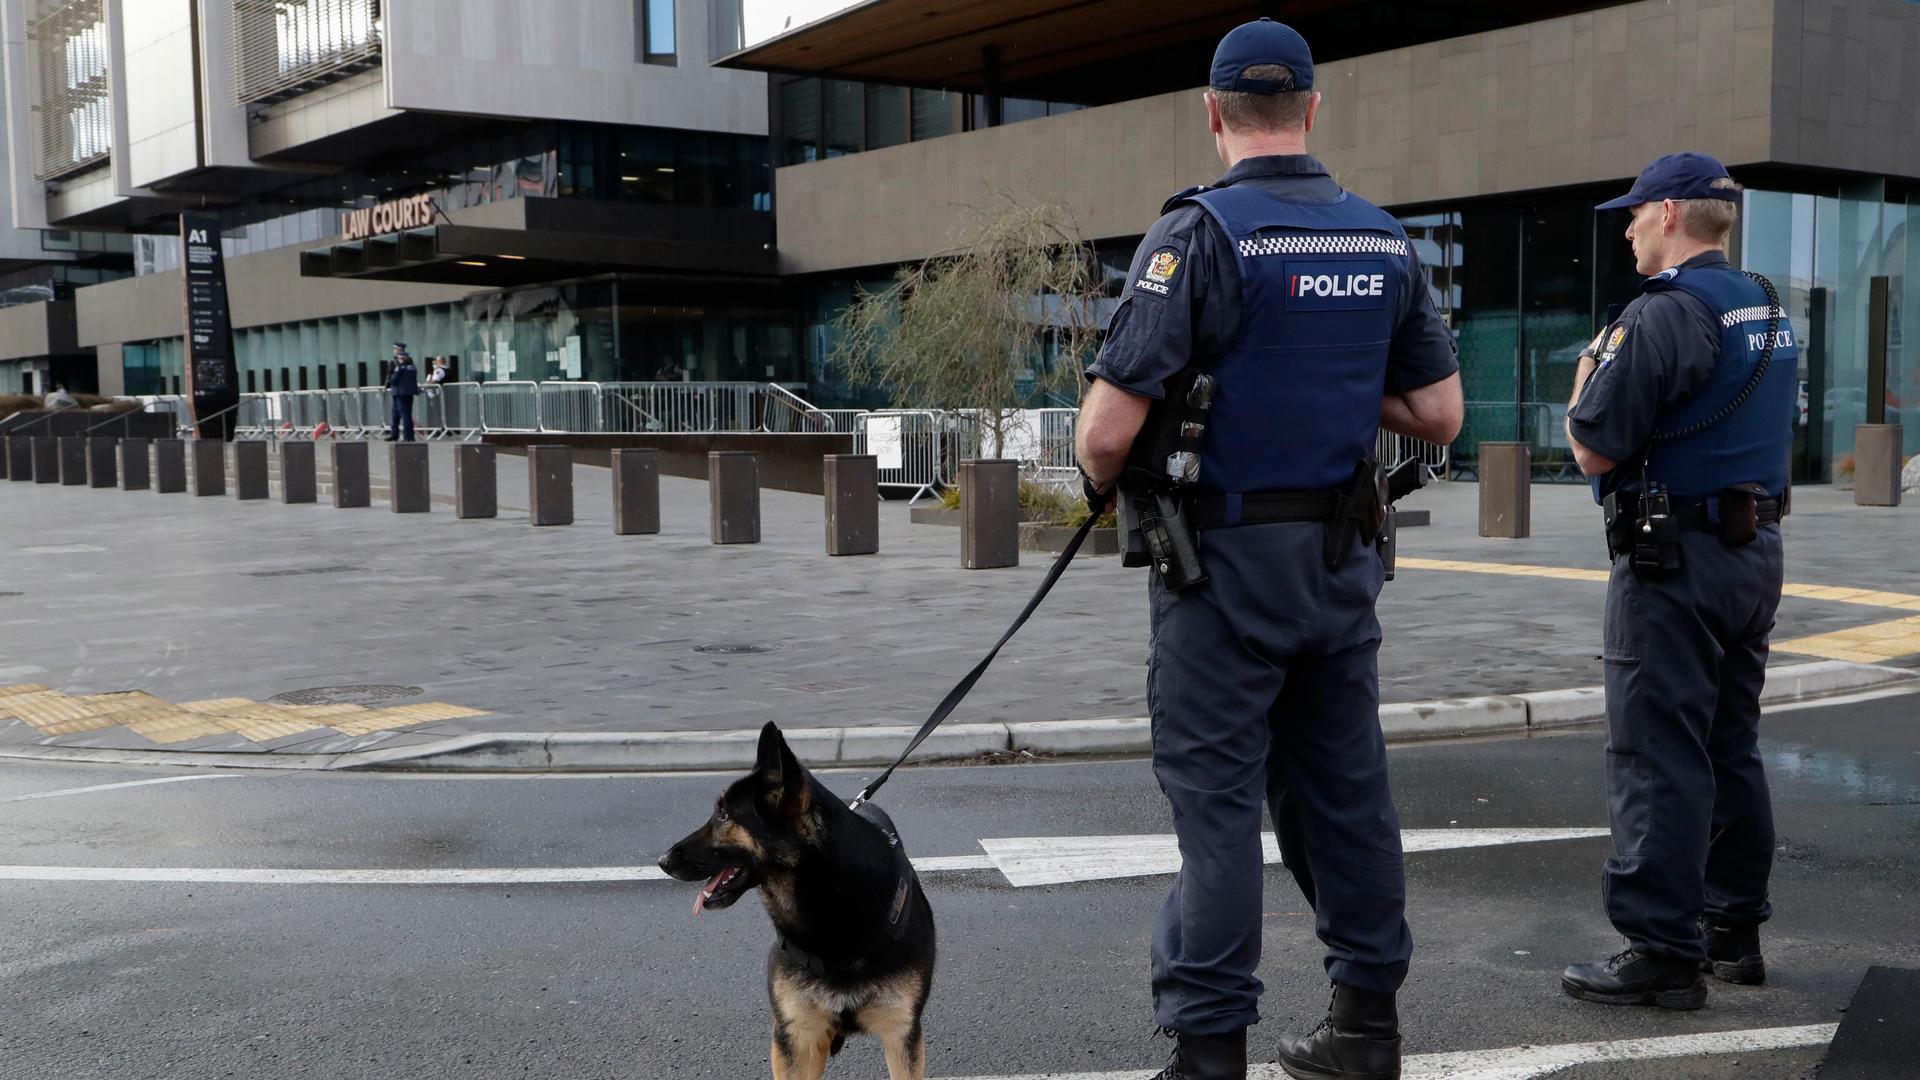 Armed police stand in front of a building with a police dog